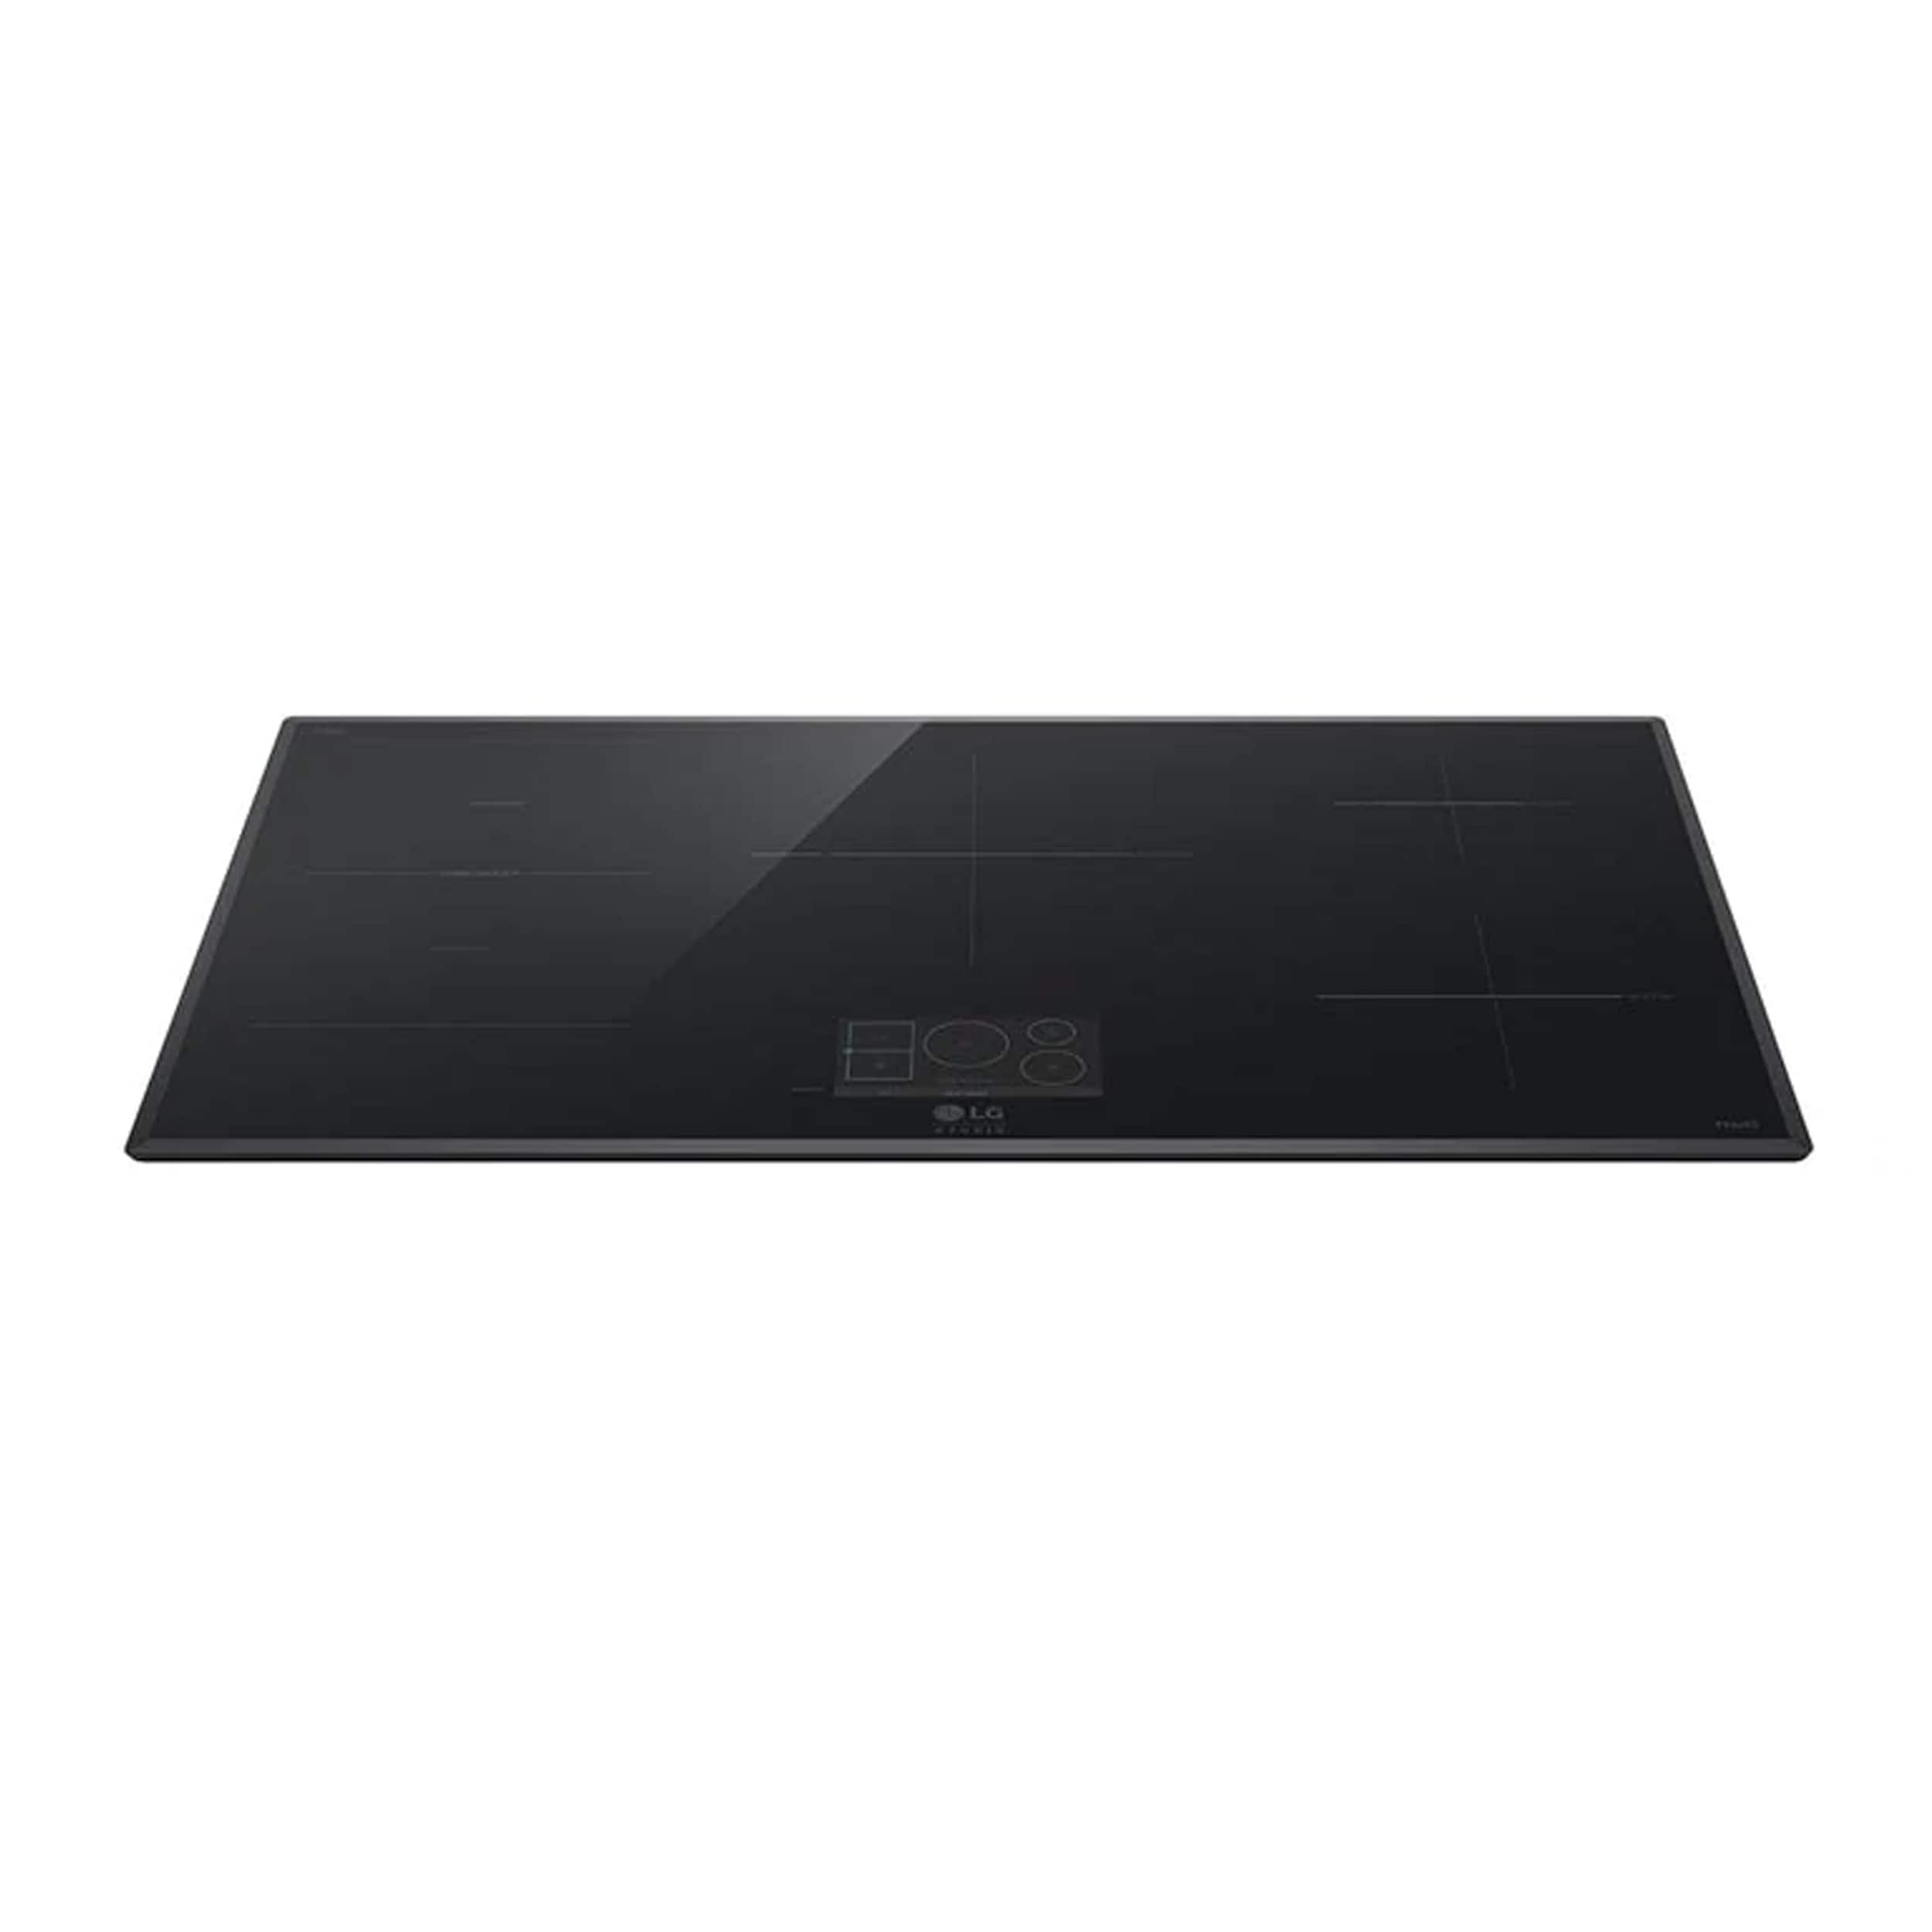 LG Studio 36IN INDUCTION COOKTOP WITH 5 BURNERS AND FLEX COOKING ZONE - MODEL CBIS3618B